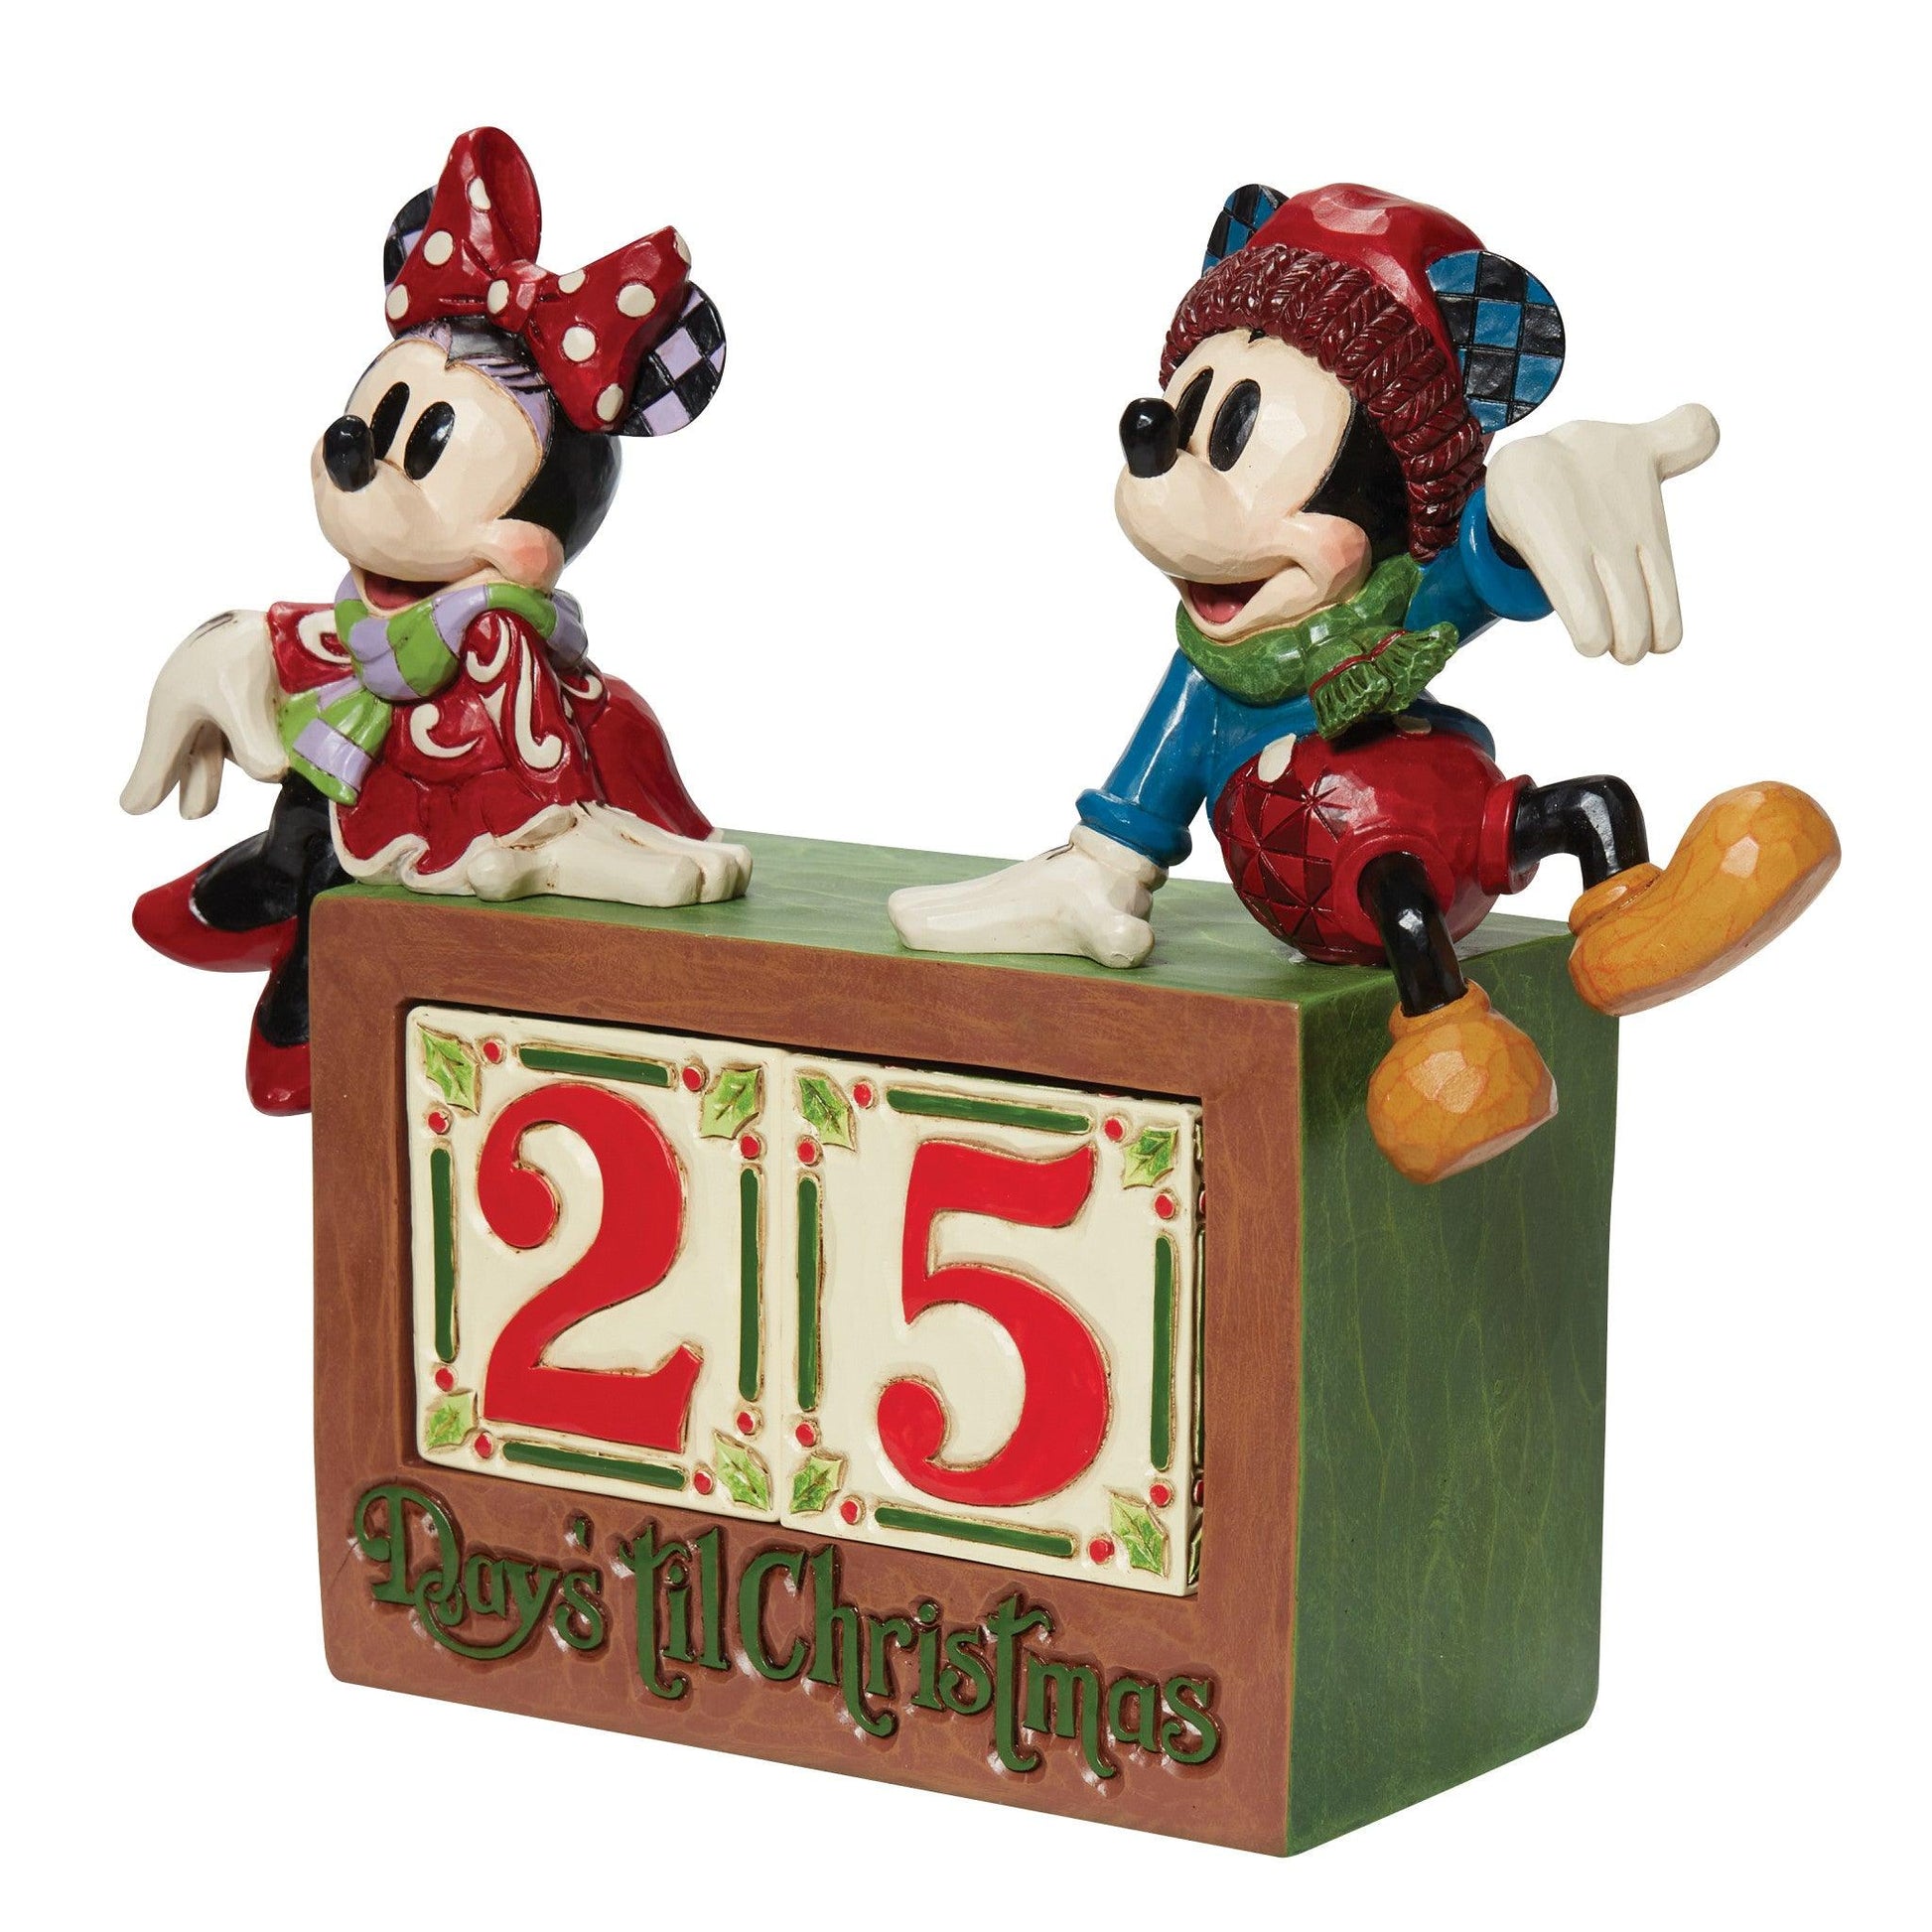 Mickey & Minnie Mouse Christmas Calendar - Gallery Gifts Online 